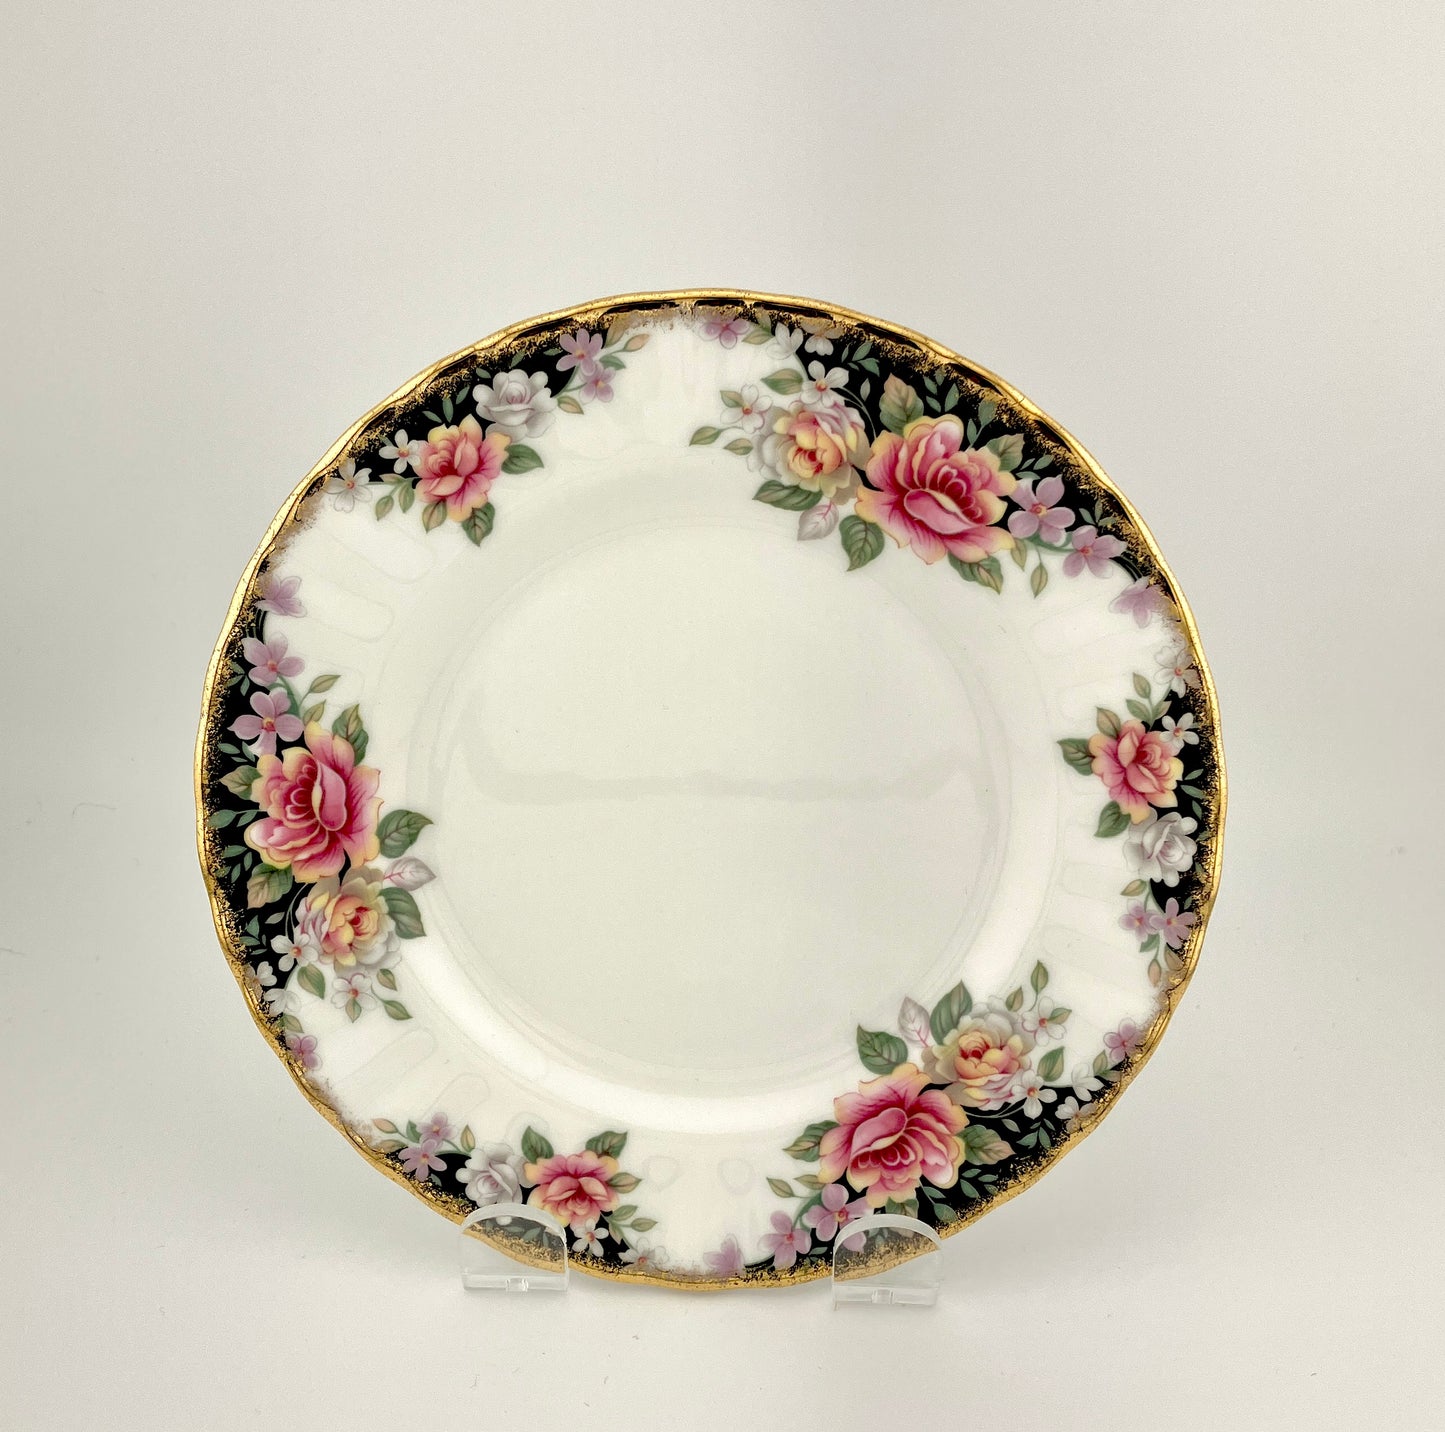 Royal Albert, Concerto, Bread and Butter Plate, 6.25", Vintage, Made in England, Floral